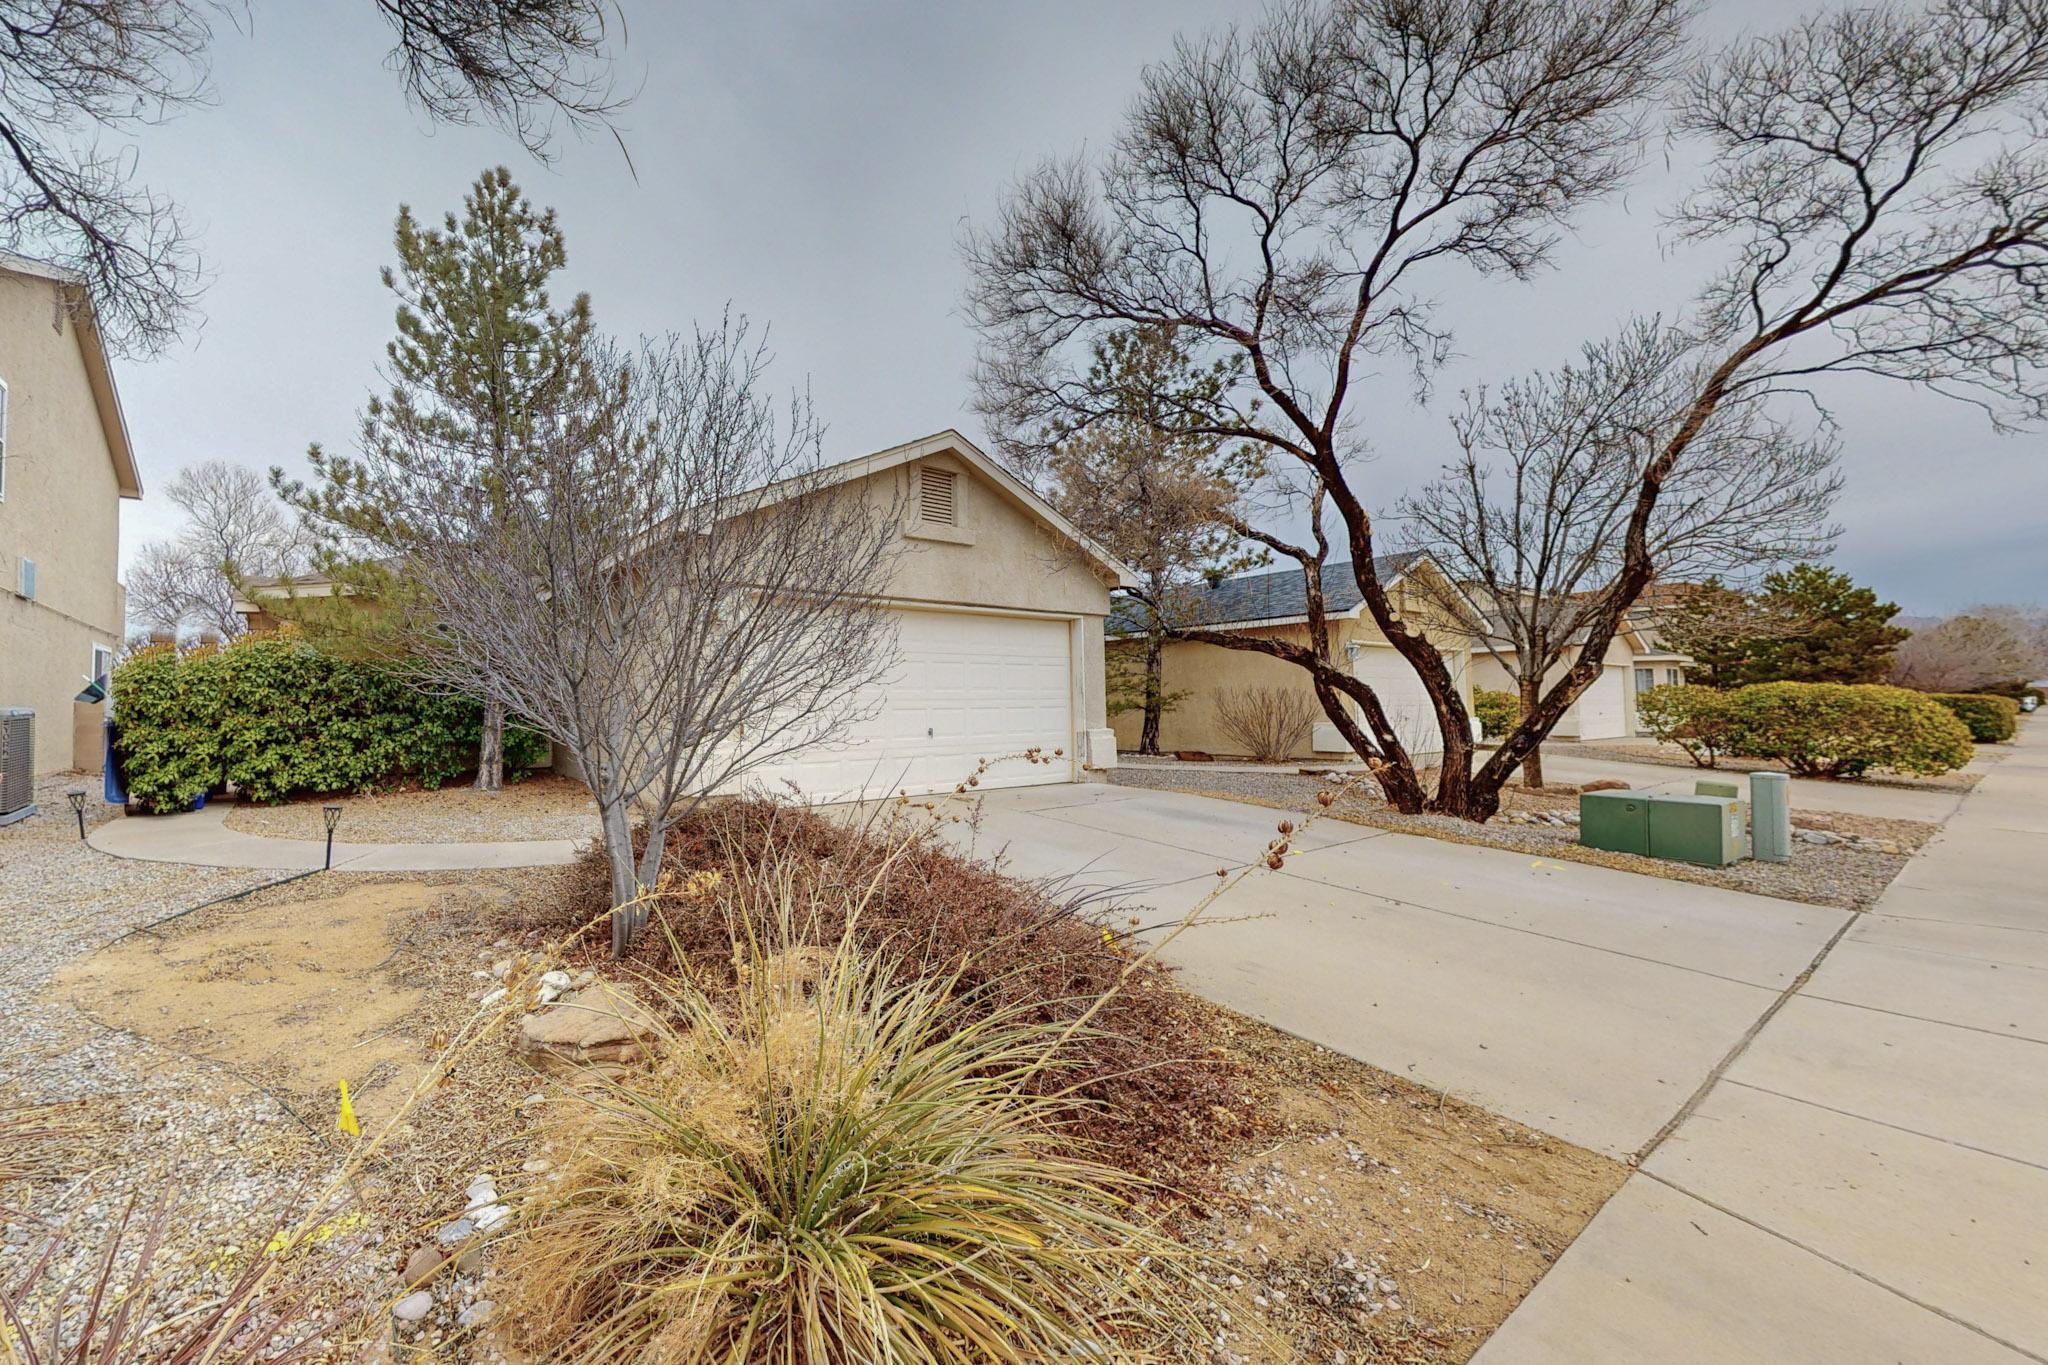 Very nice one story, 3 bedroom 2 Bath home in Ventana Ranch. Located in a small gated community and next to large city park on Universe. Access to community pool. This home has a great floor plan and is conveniently located near restaurants, retail, and parks.